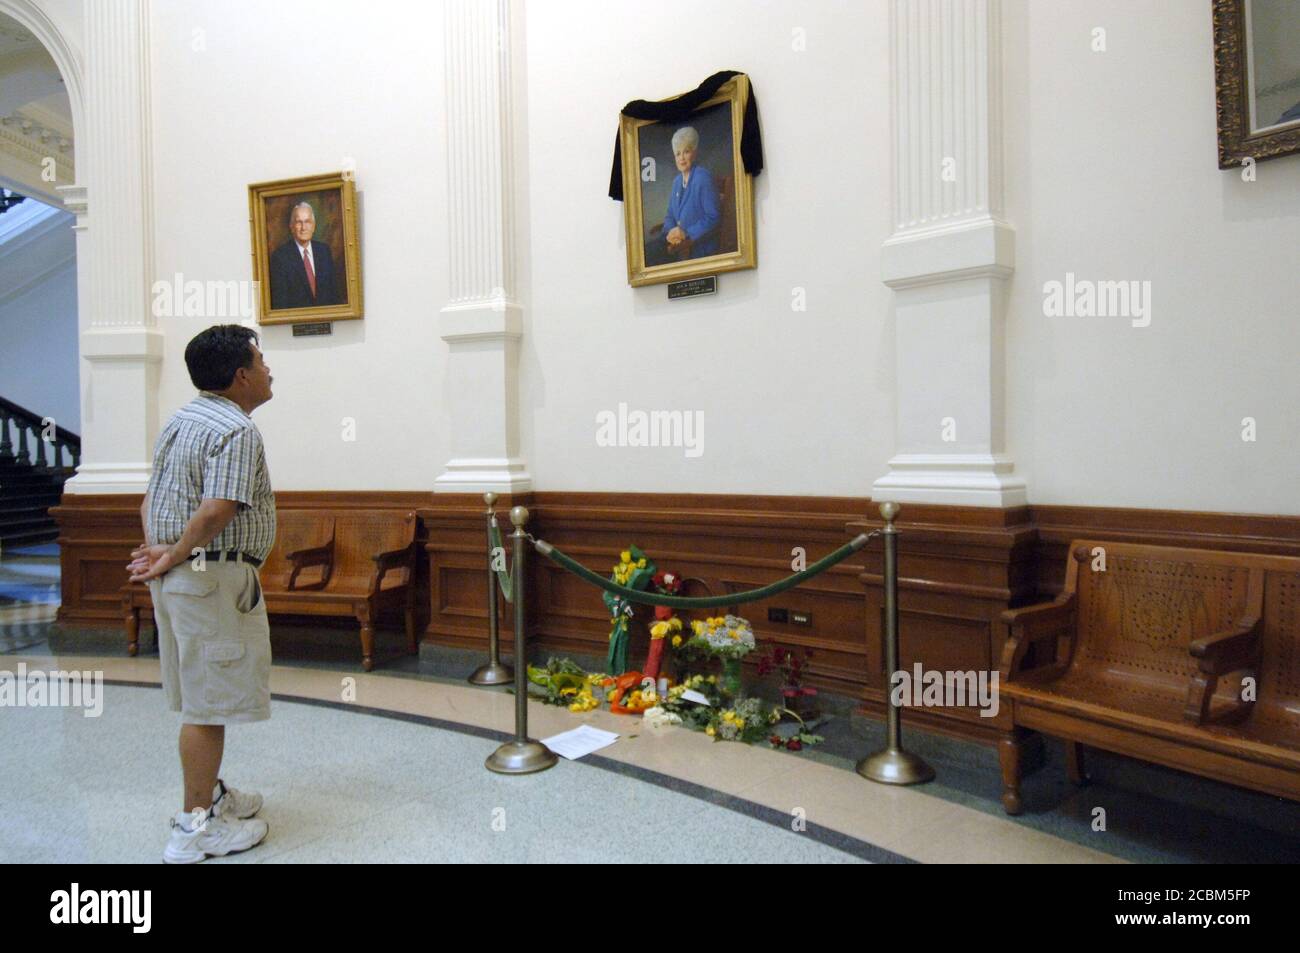 Austin, Texas September 15, 2006: Tourist view a small memorial below the official portrait of former Texas Governor Ann Richards in the rotunda of the Texas Capitol Friday afternoon. Richards,73,  known for her down-home humor and political savvy, died Wednesday in Austin. ©Marjorie Cotera / Daemmrich Photo / Stock Photo